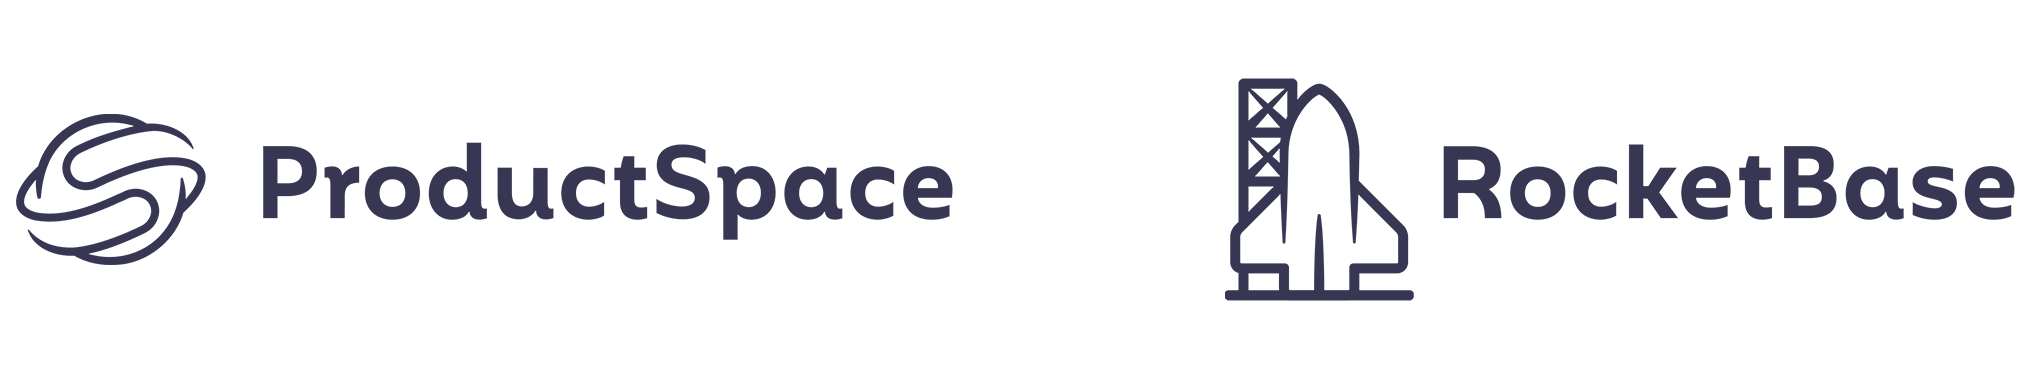 ProductSpace and RocketBase final full logo